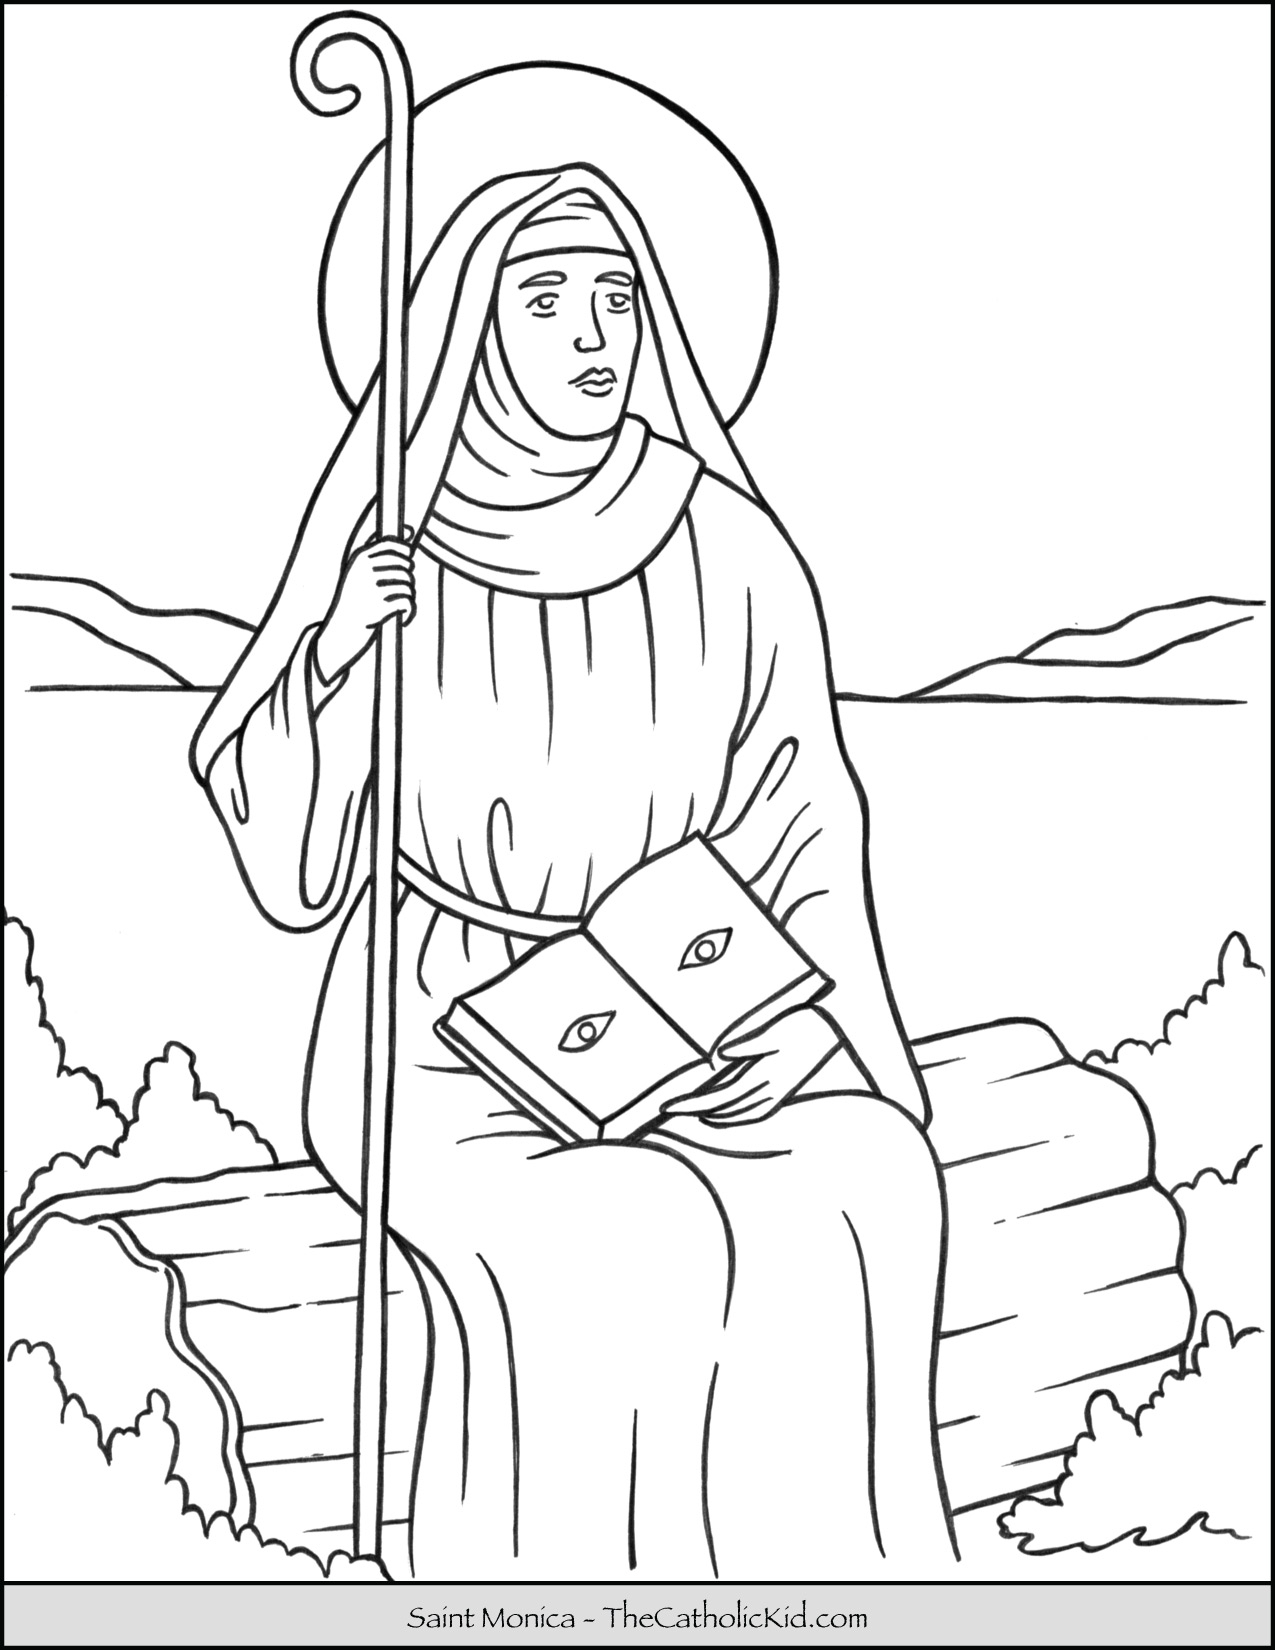 St Augustine Coloring Page Saint Monica Coloring Page Thecatholickid